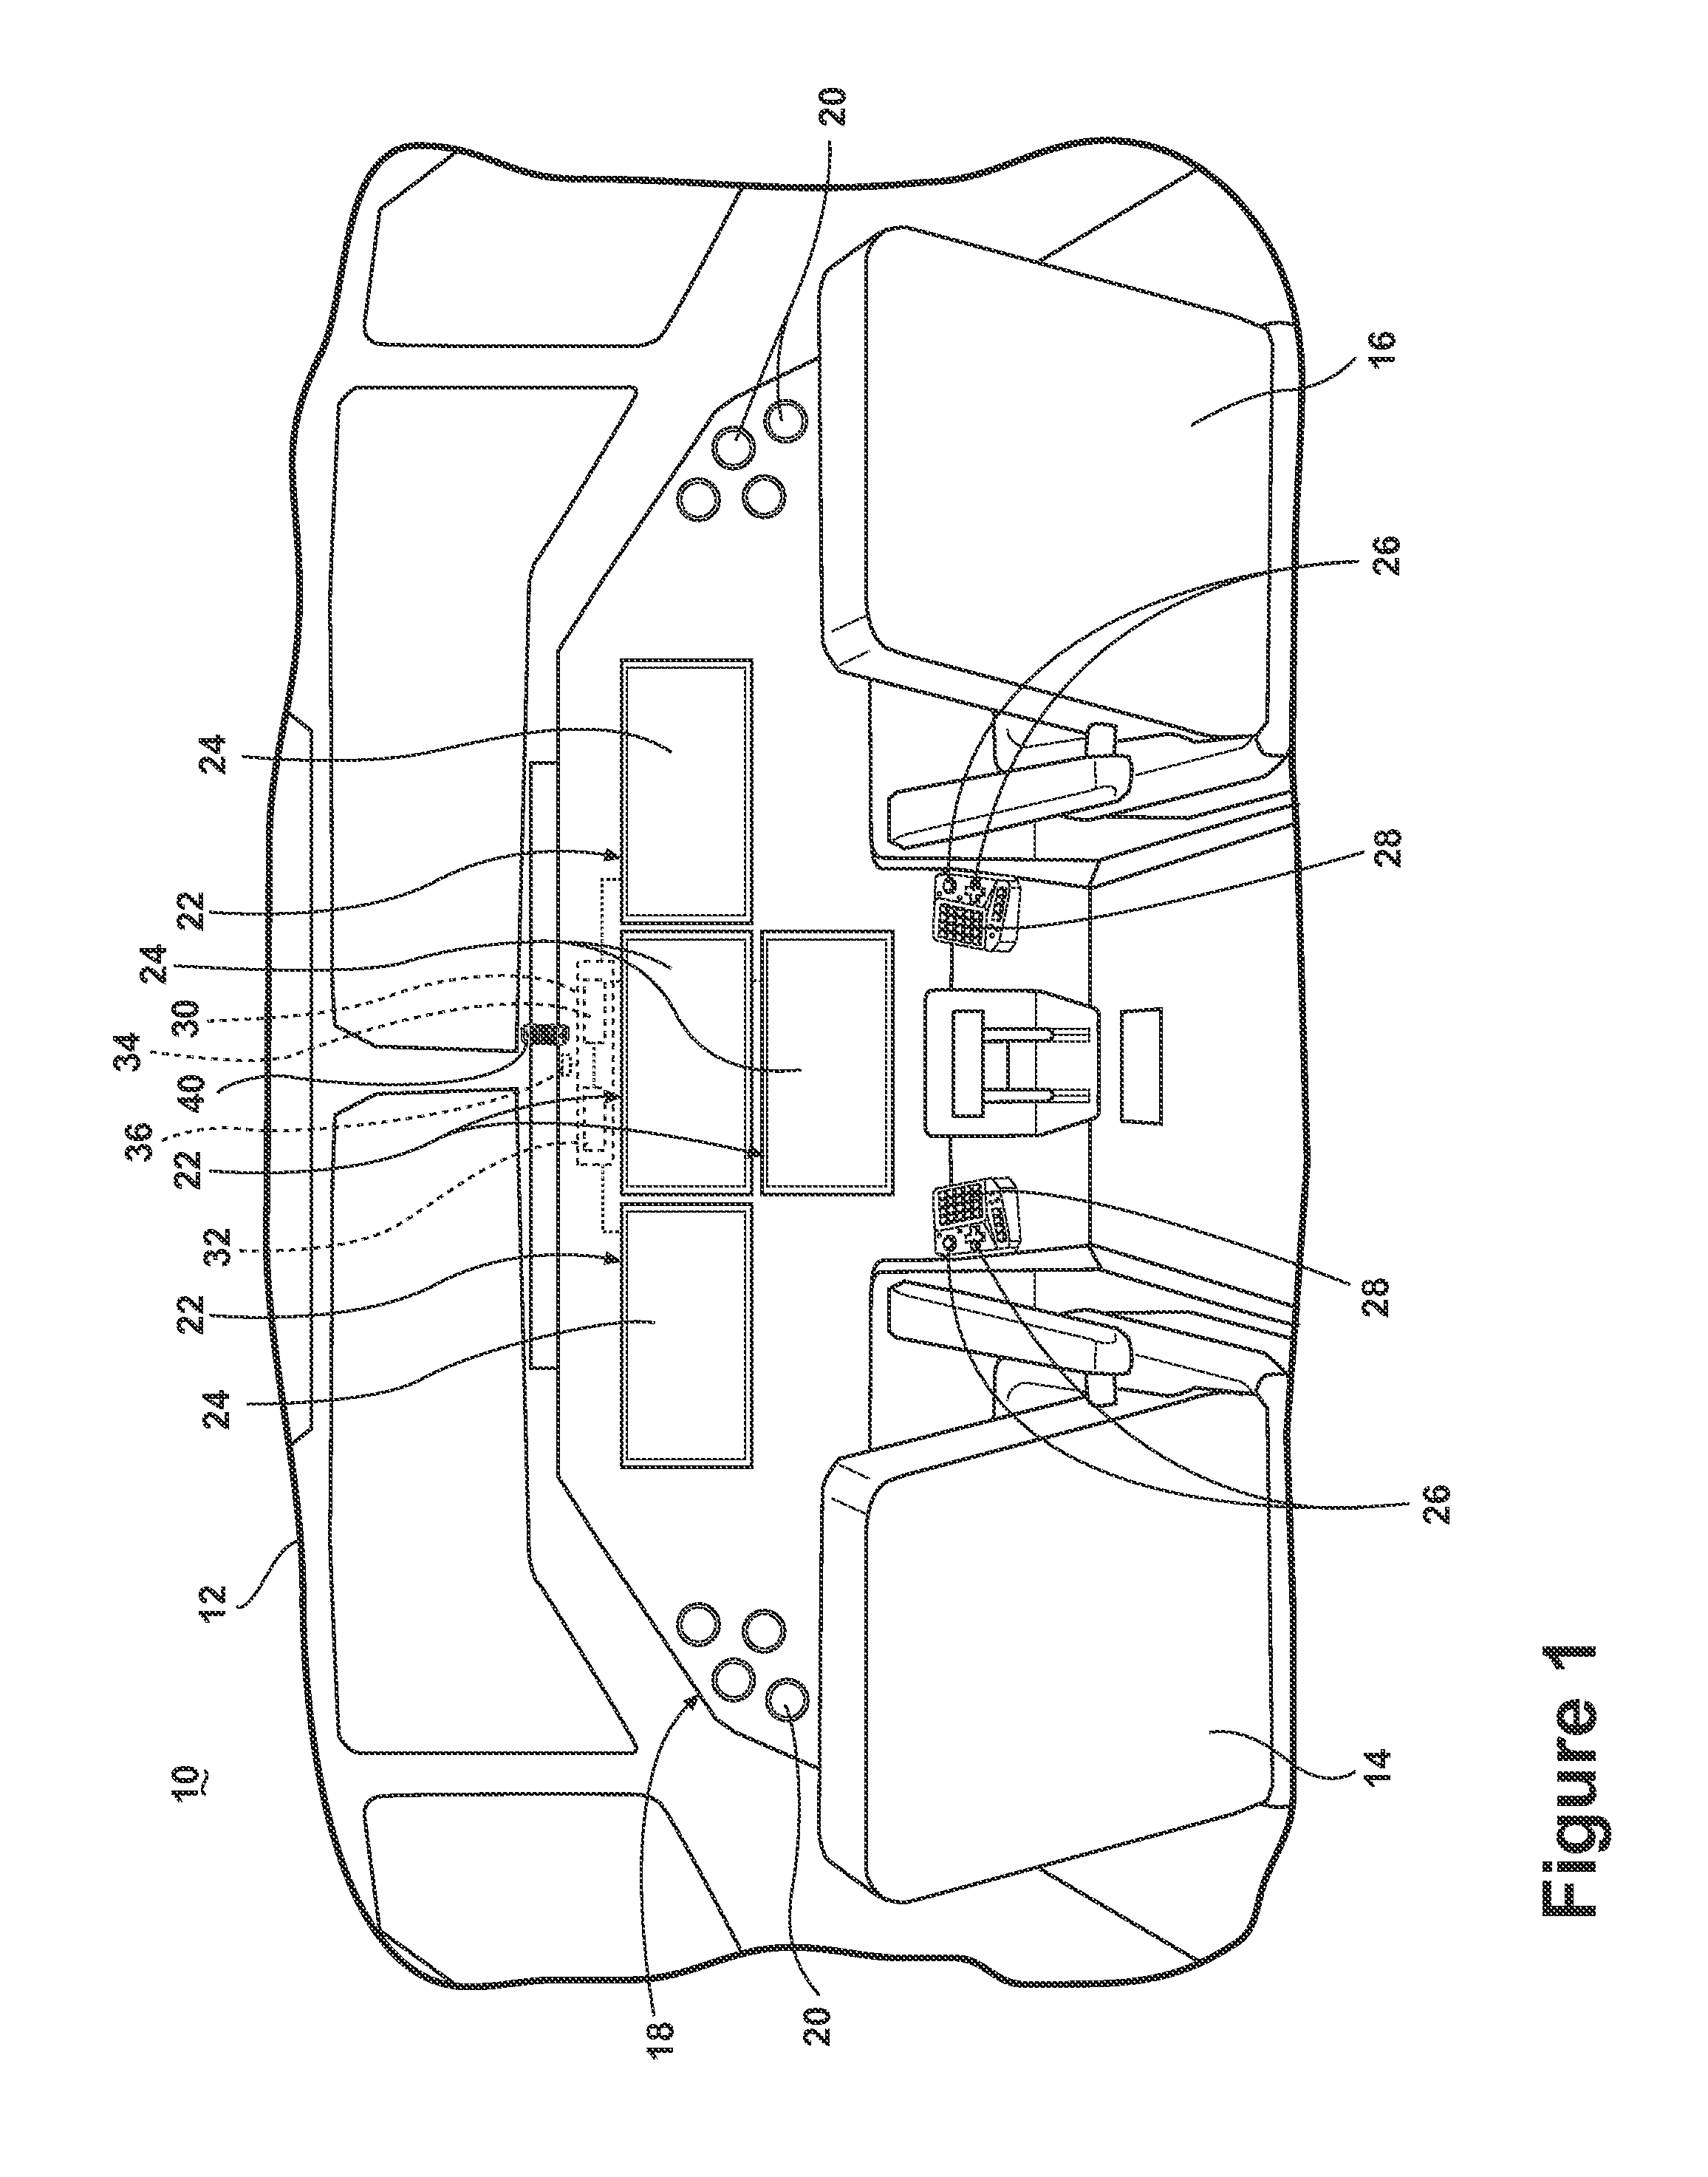 Method of determining a turbulent condition in an aircraft